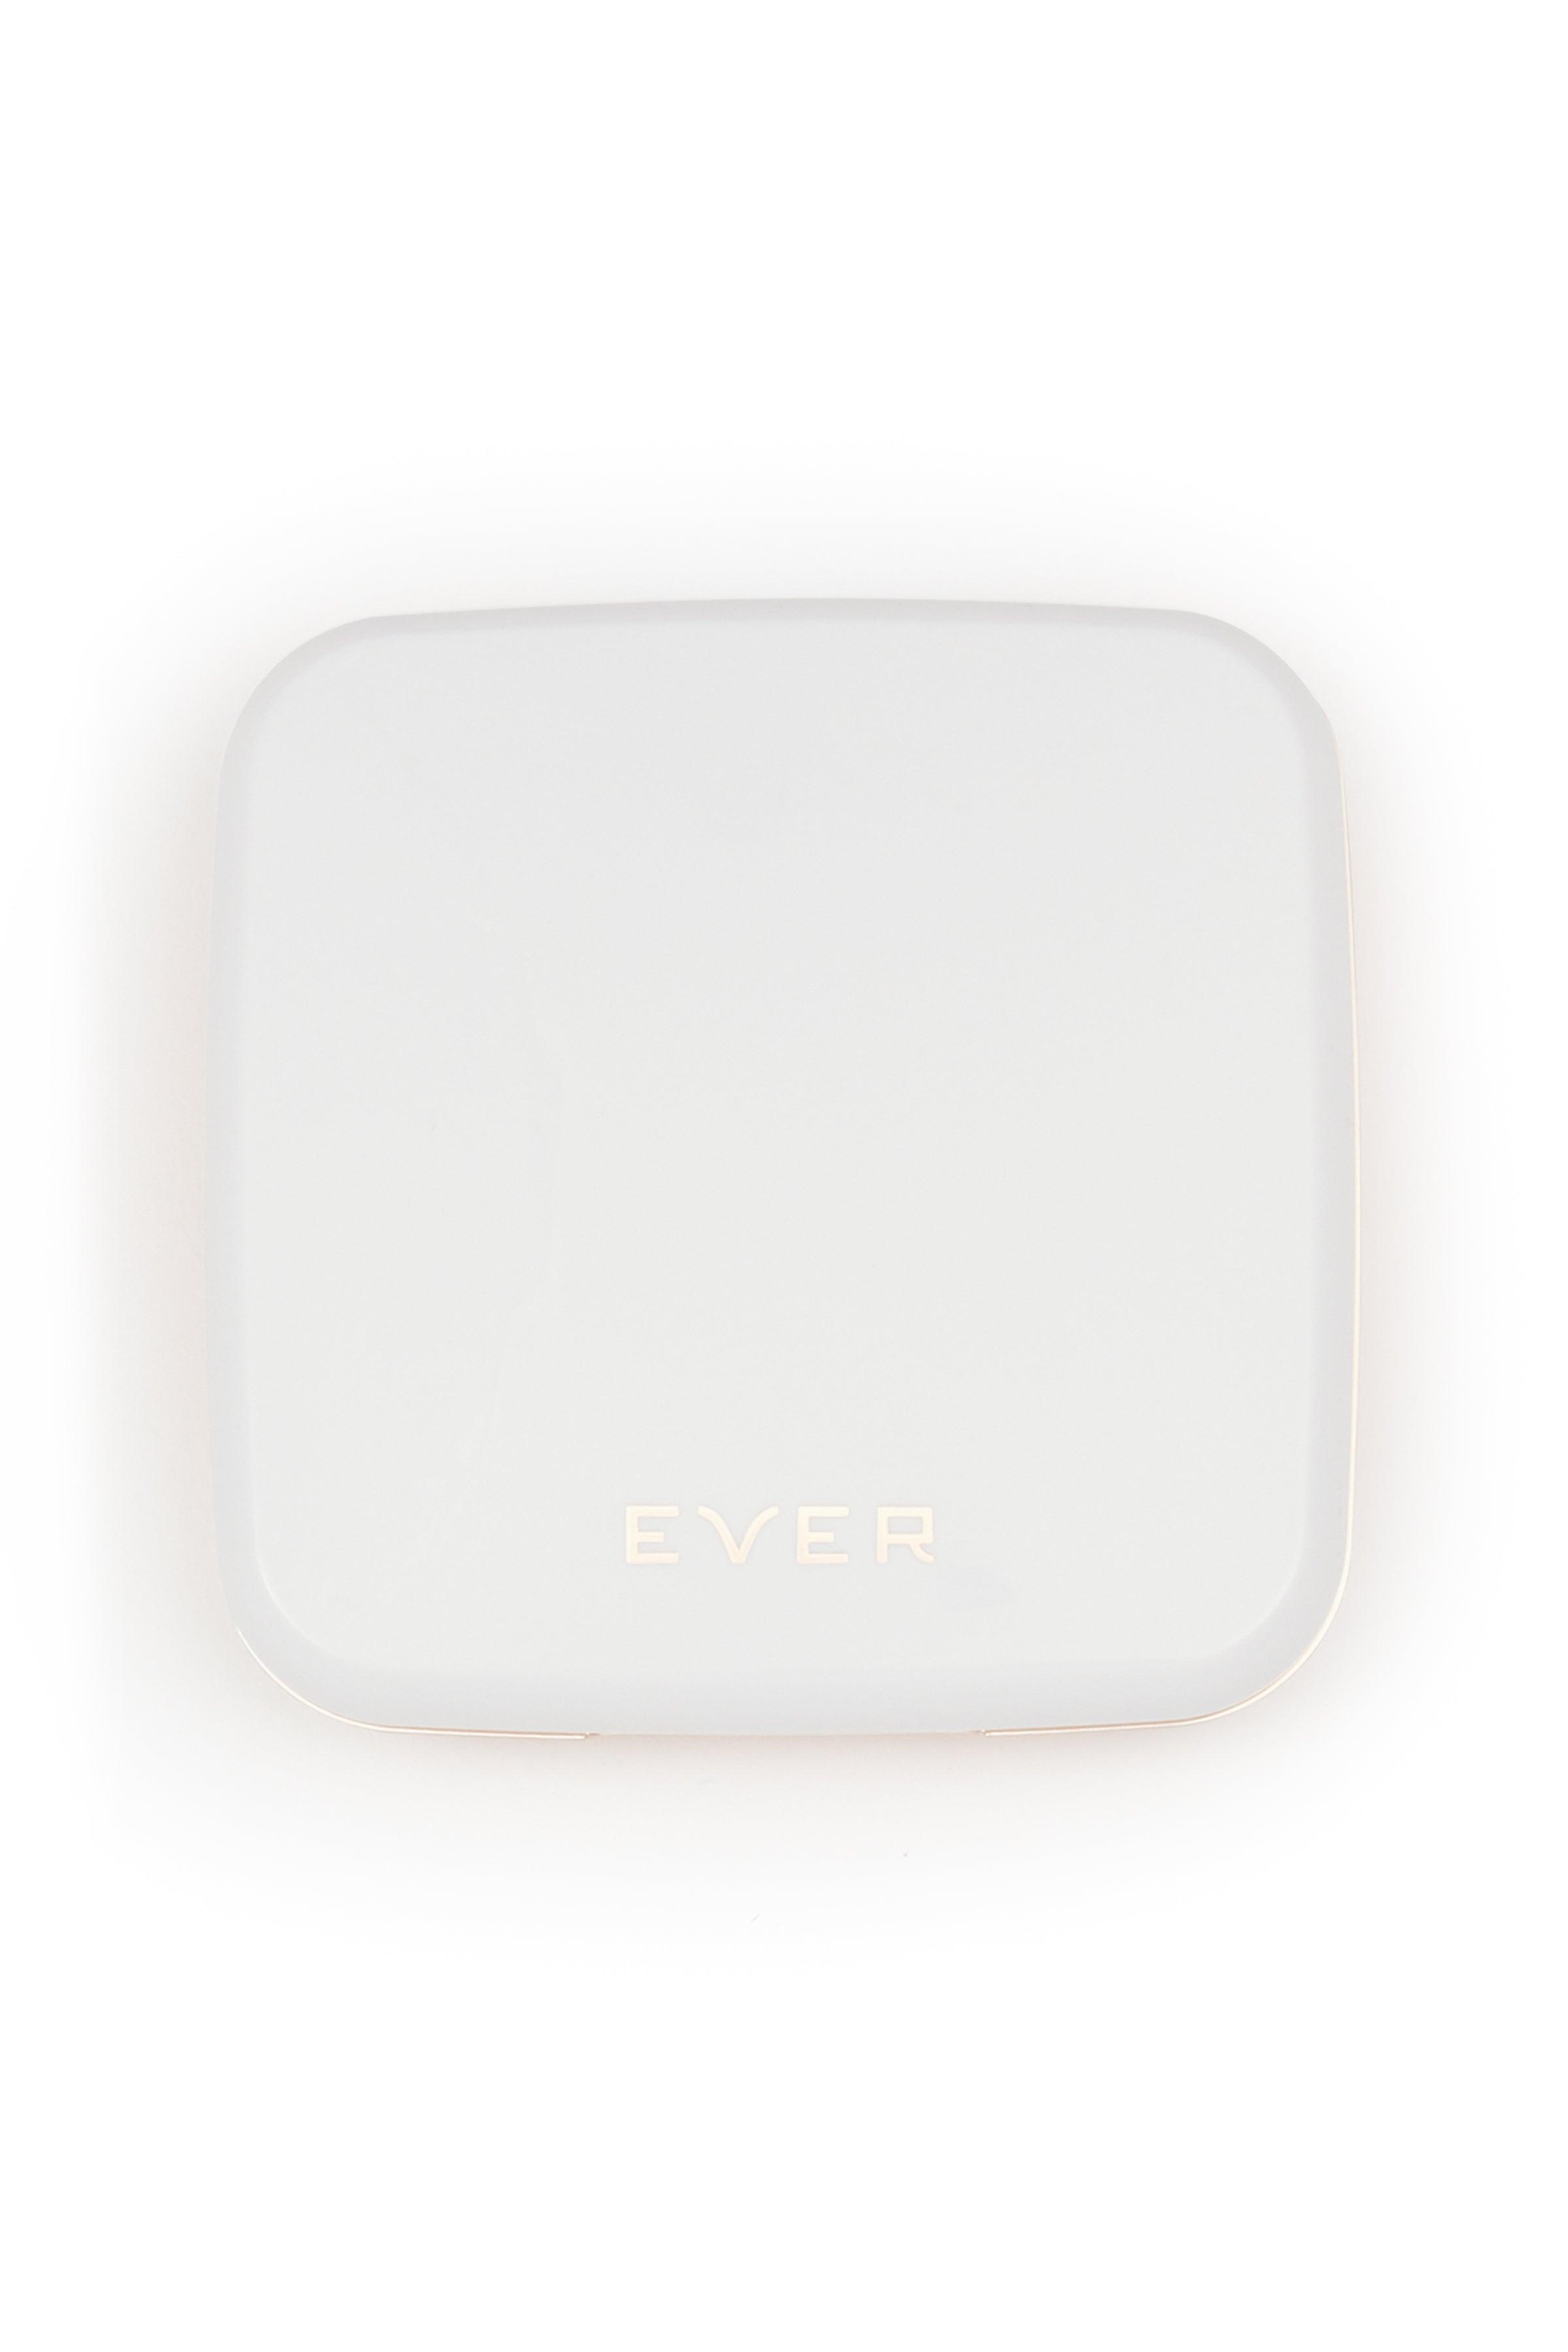 BLUR Perfecting Face Powder - EVER